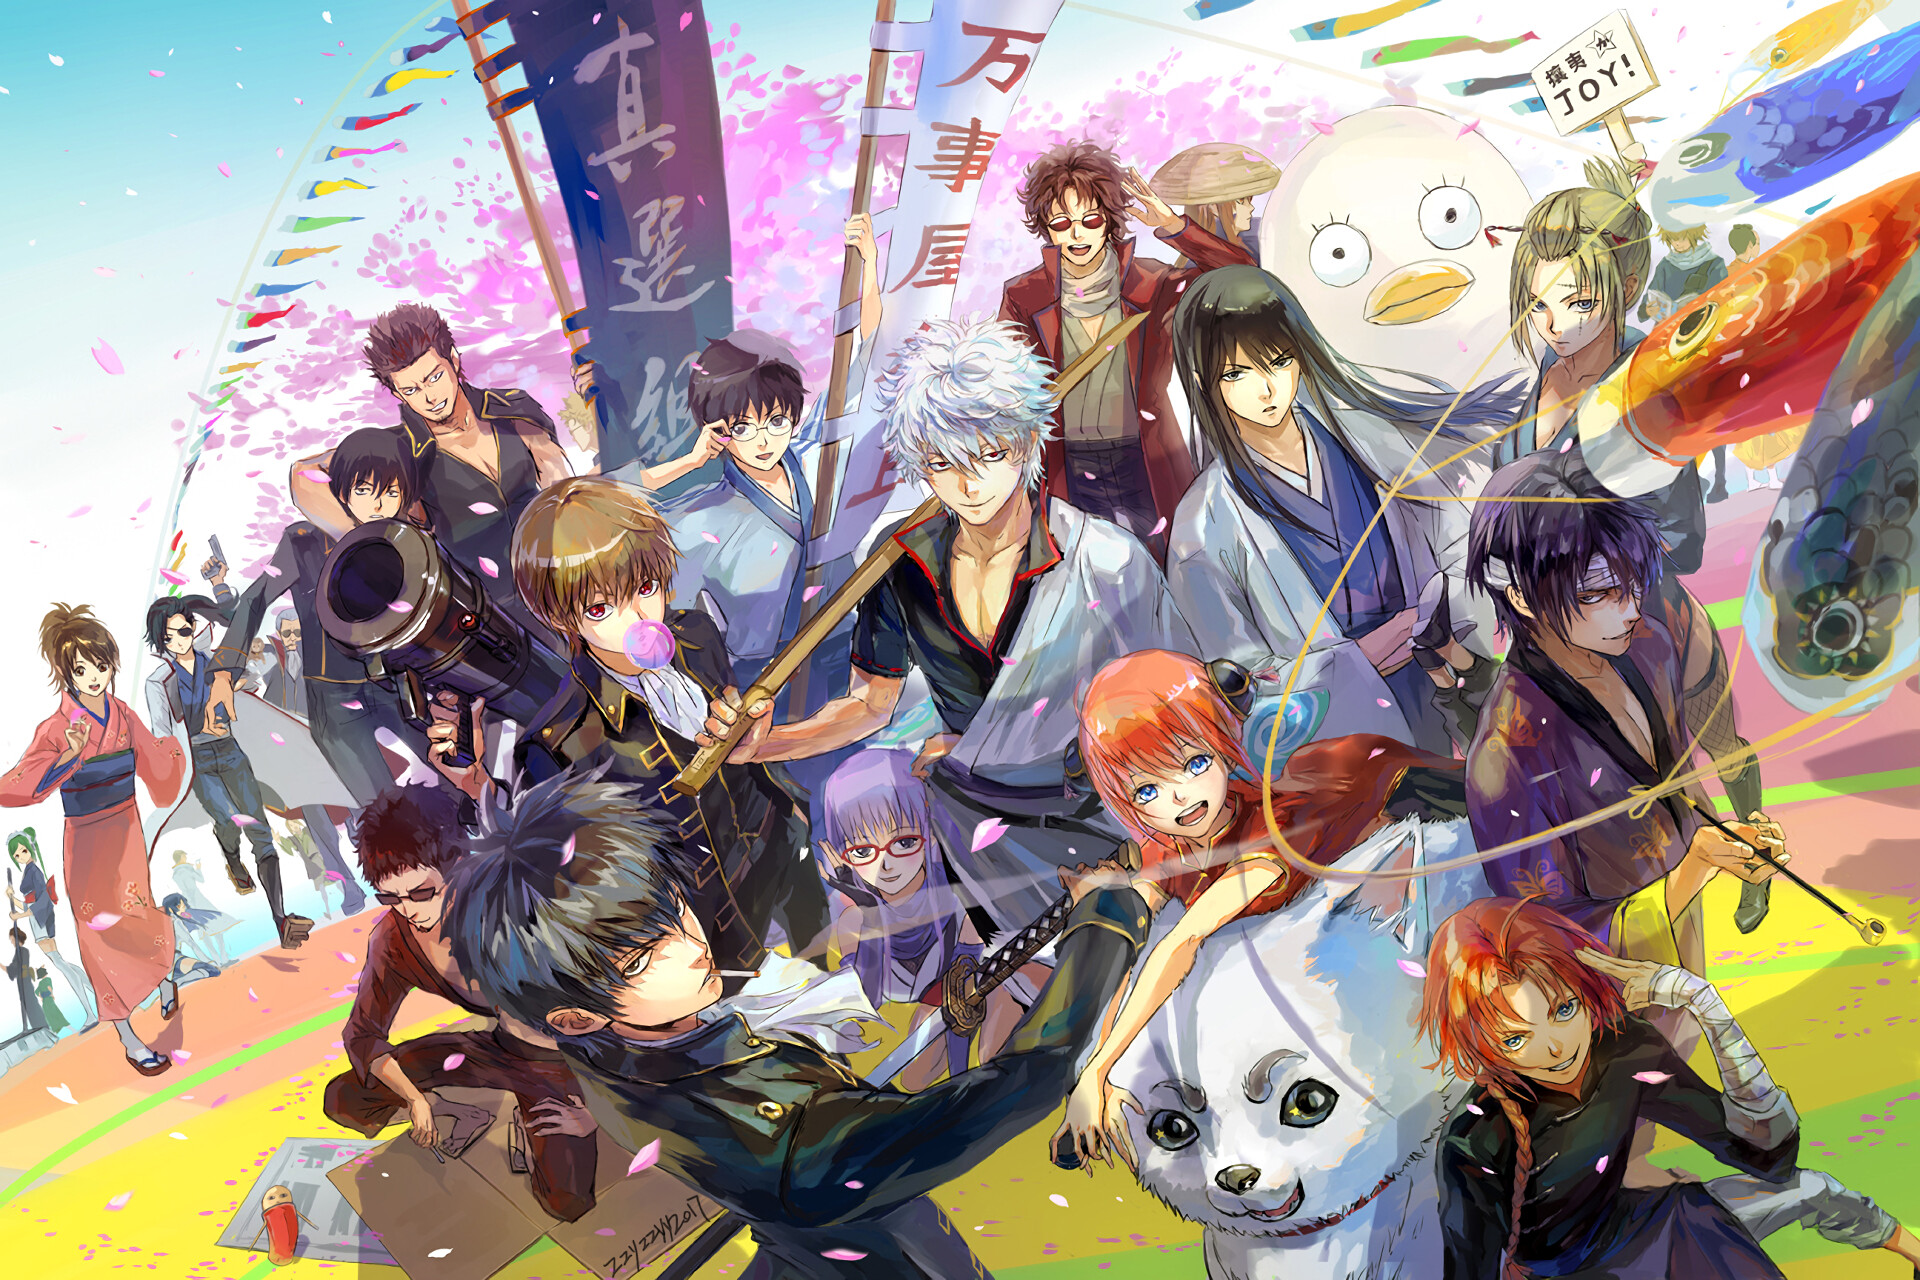 Gintama: The Final: The 3rd and film of the anime franchise, adapting the remainder of the Silver Soul Arc. 1920x1280 HD Wallpaper.